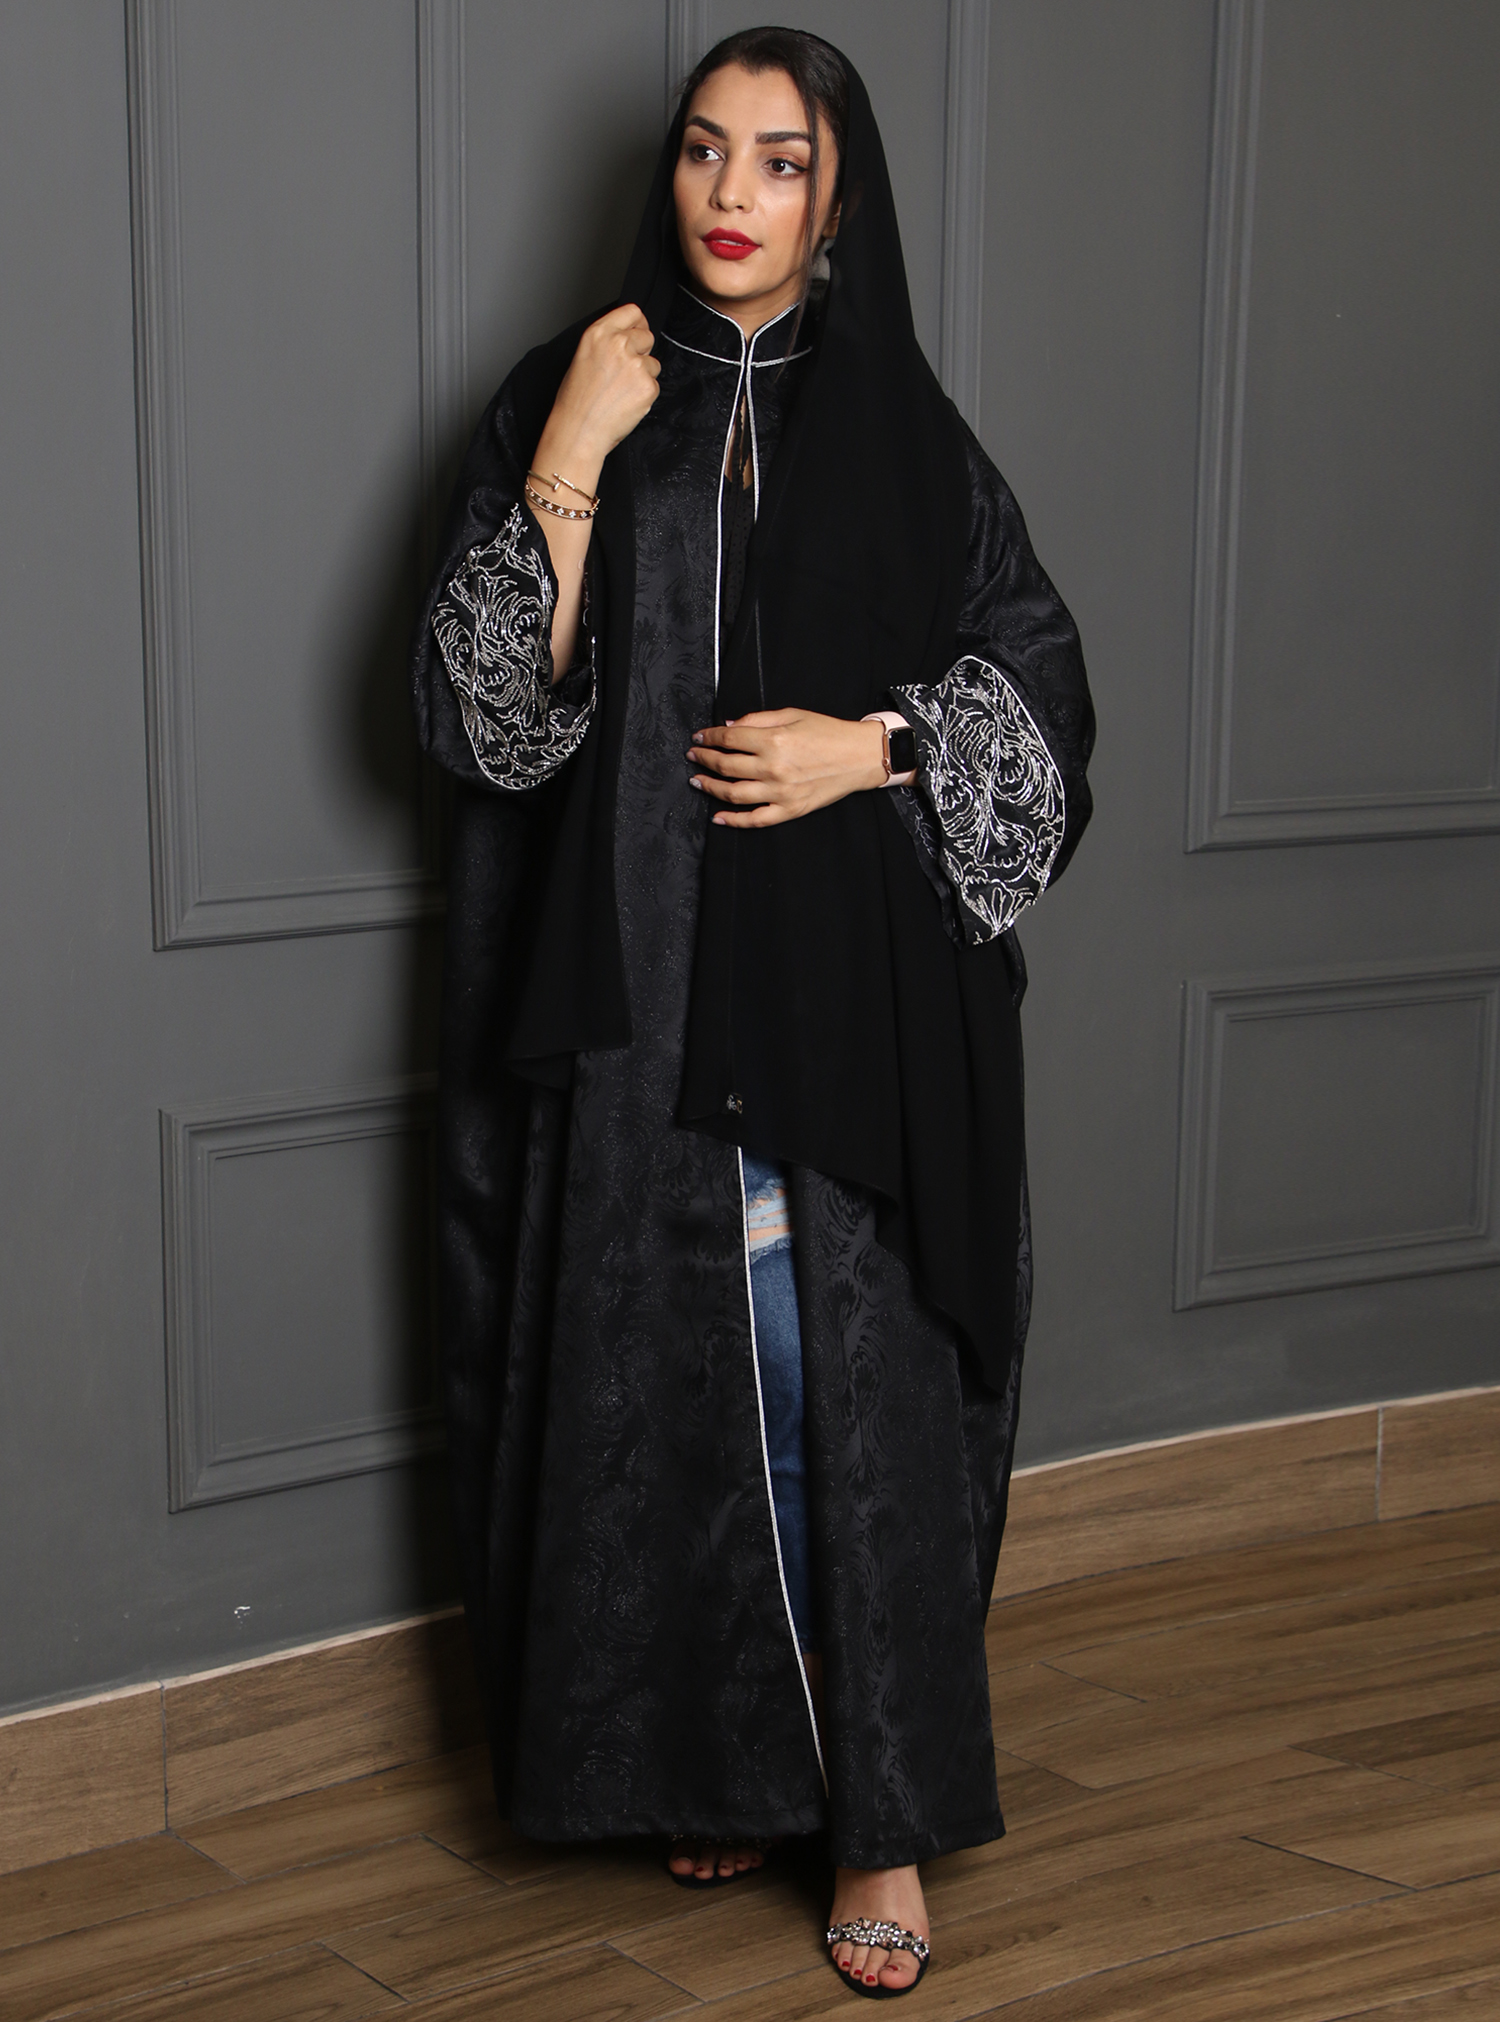 MRA41 Gorgeous speacial occasions abaya with silver metallic hand ...